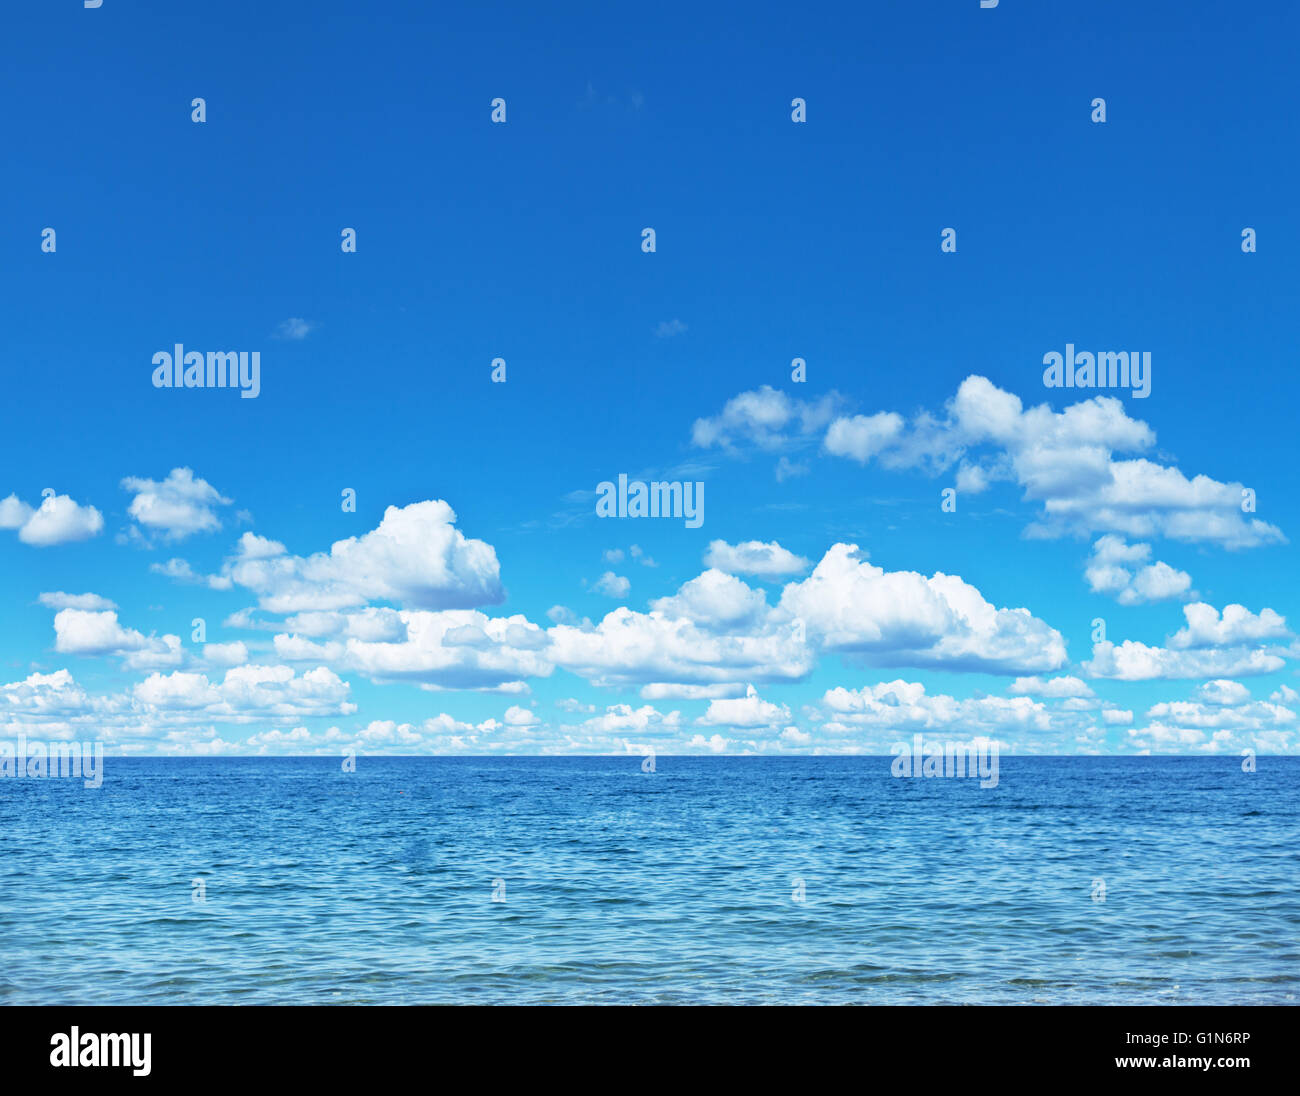 Seascape with calm sea and cloudy sky. Stock Photo